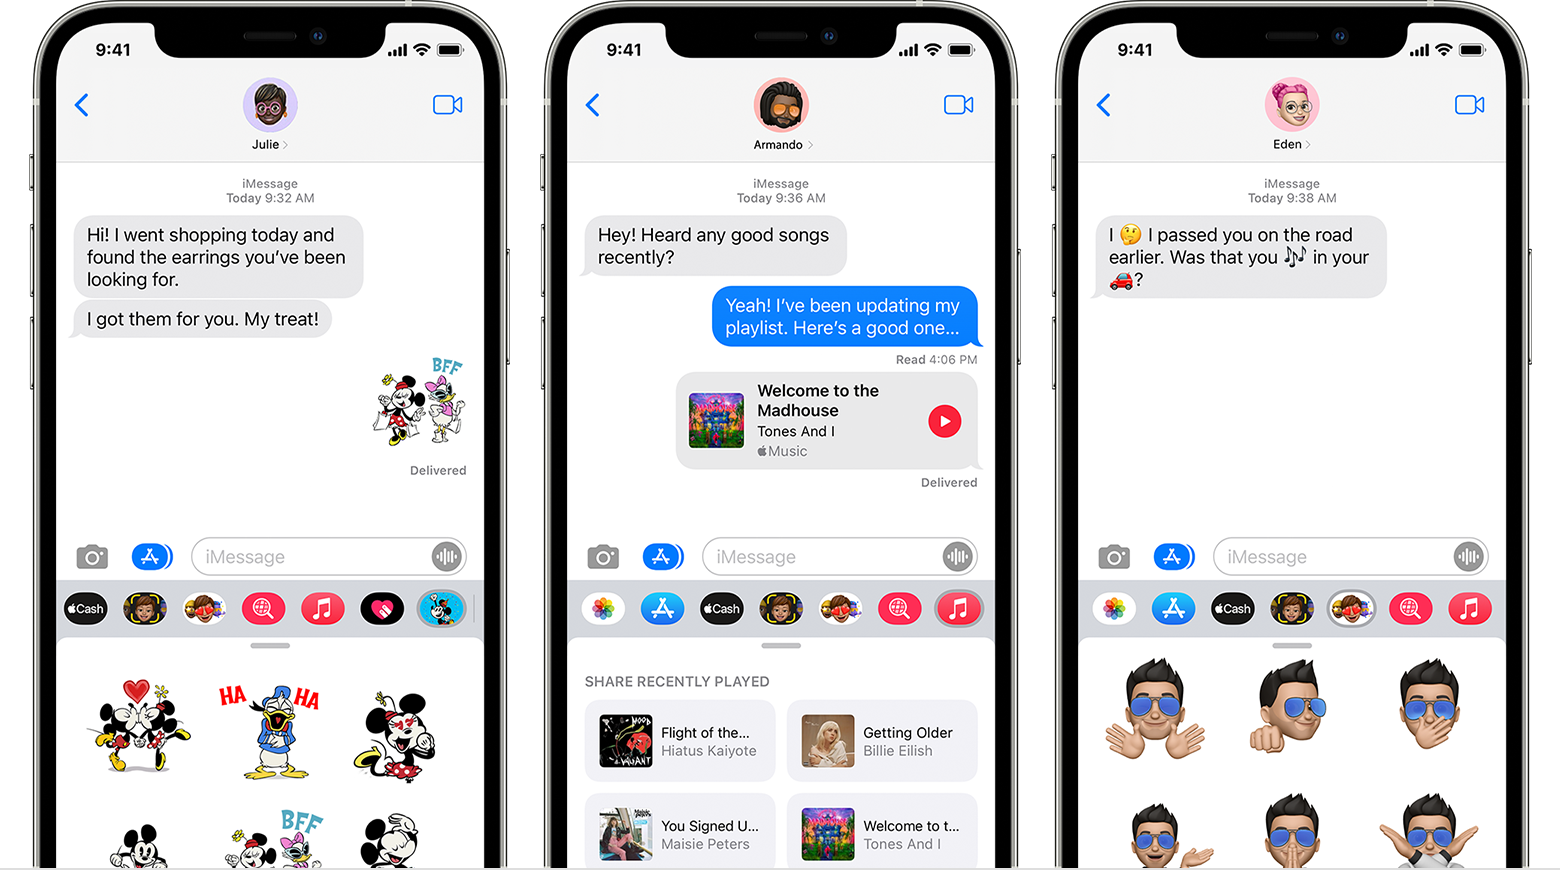 iPhone showing iMessage apps in a messages conversation